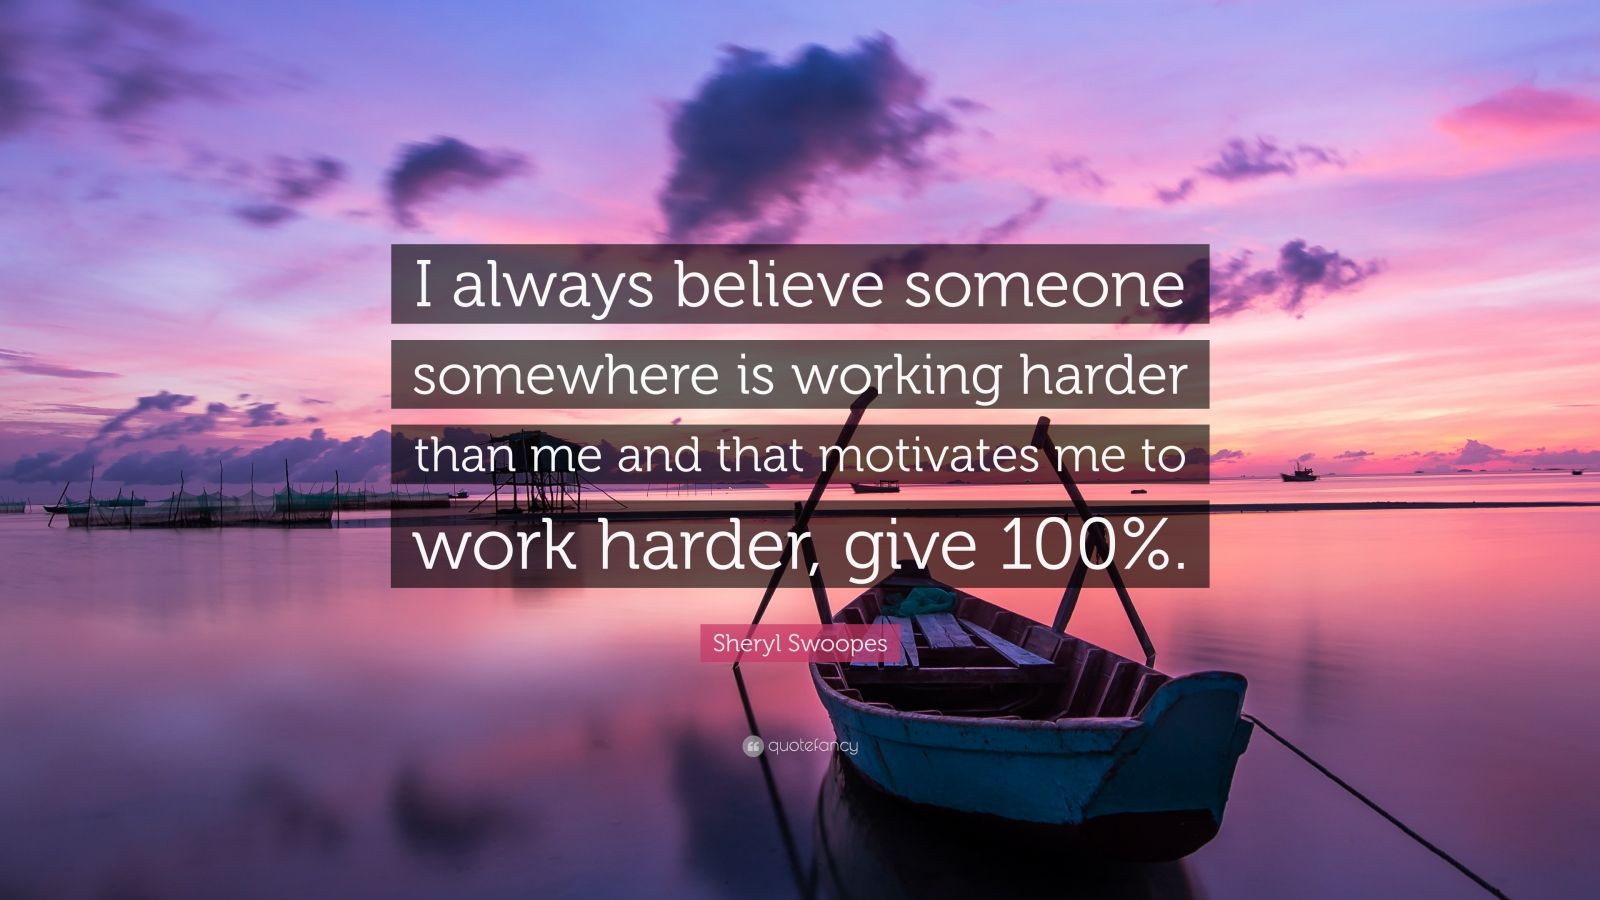 Sheryl Swoopes Quote: “I always believe someone somewhere is working ...